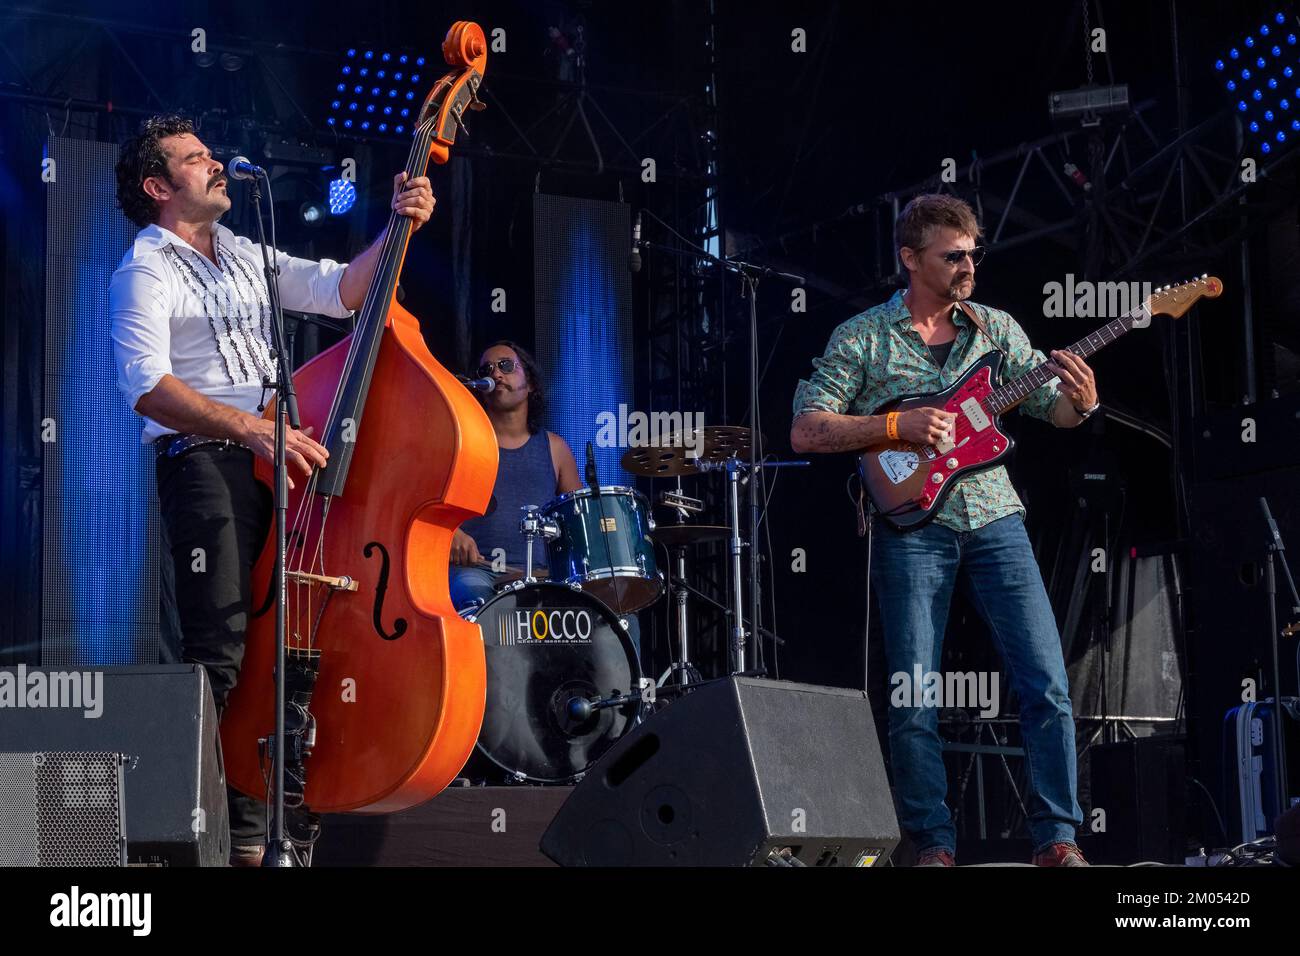 Double bass player and singer, guitarist and drummer of the rockabilly band Johnny Montreuil on stage Stock Photo